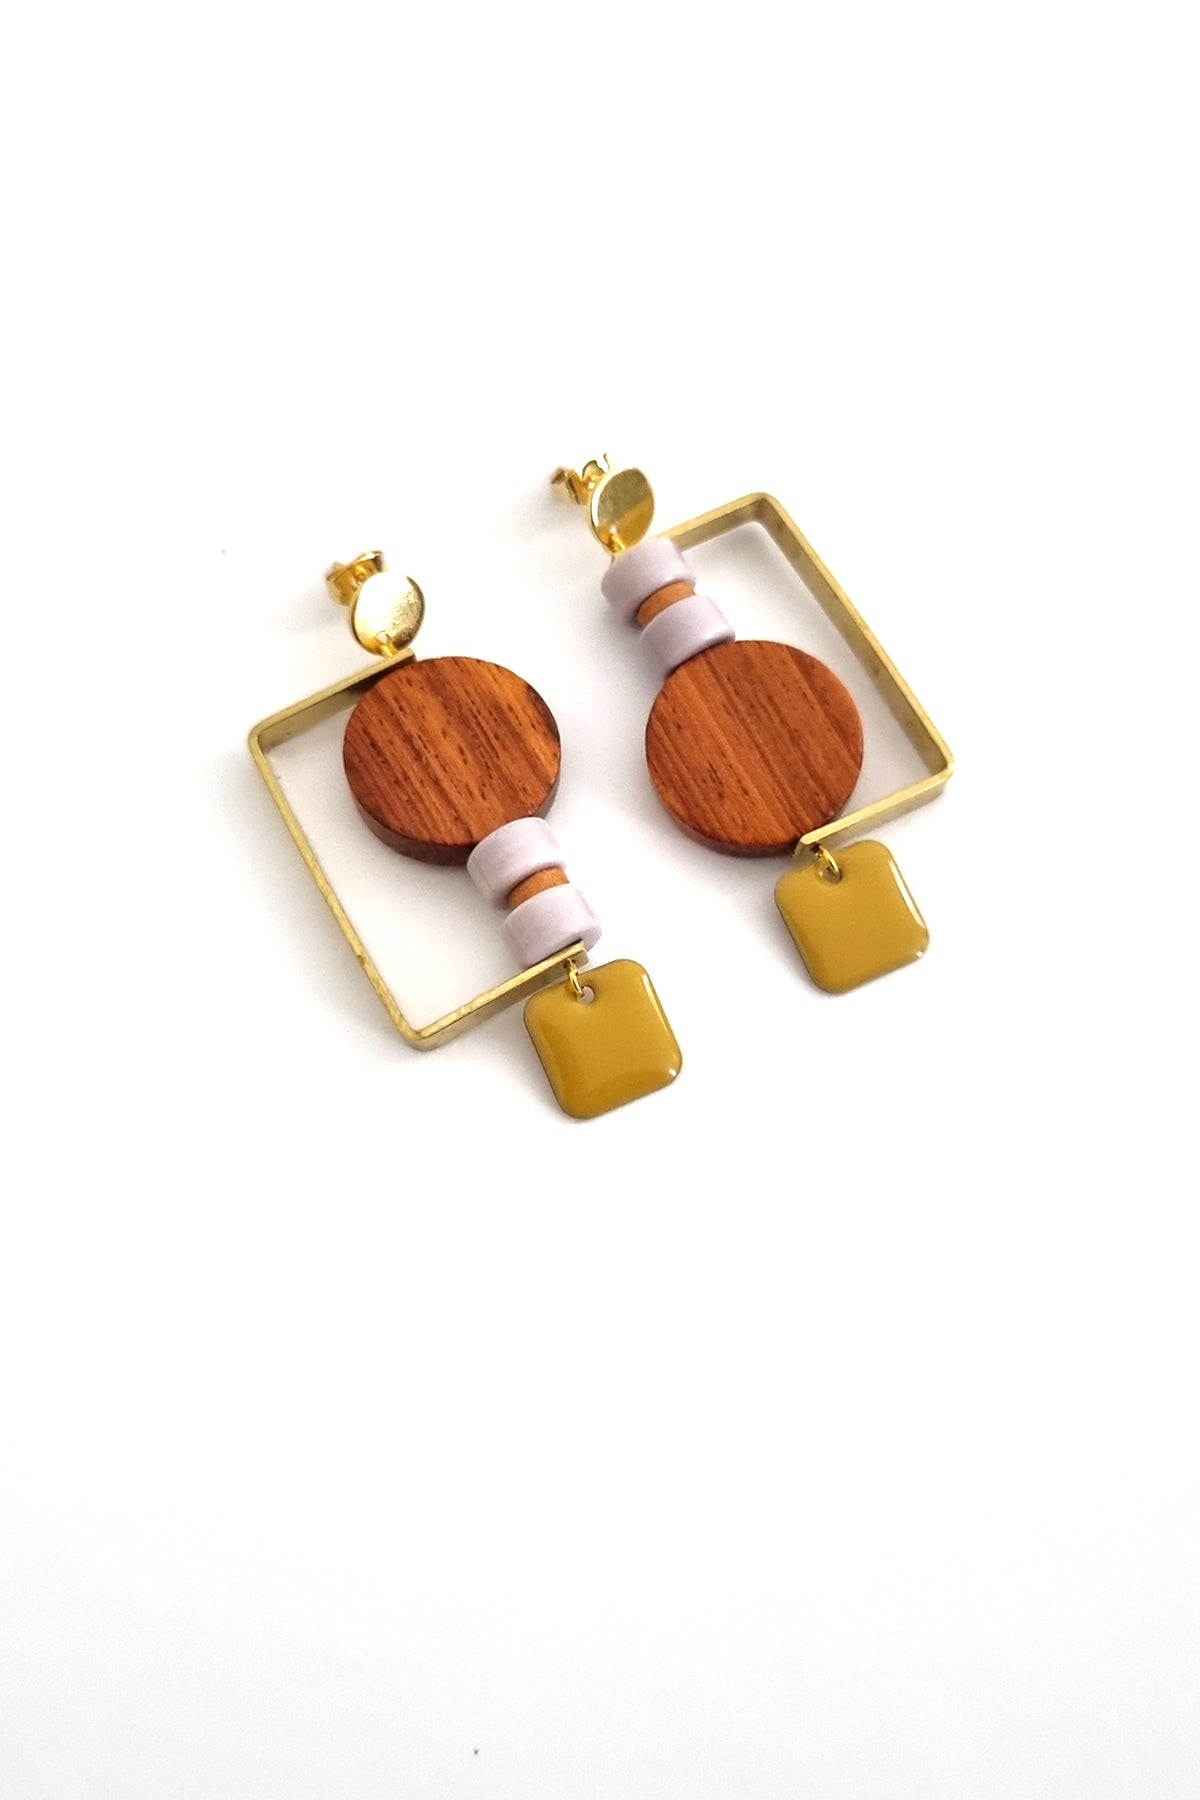 A pair of stud dangle earrings lay against a white background. They feature a half square brass shape that envelopes a circular wooden bead, and two mauve stone beads separated by a small wooden bead. The design is flipped in each ear and a chartreuse square enamel dangle hangs from the bottom on each earring.